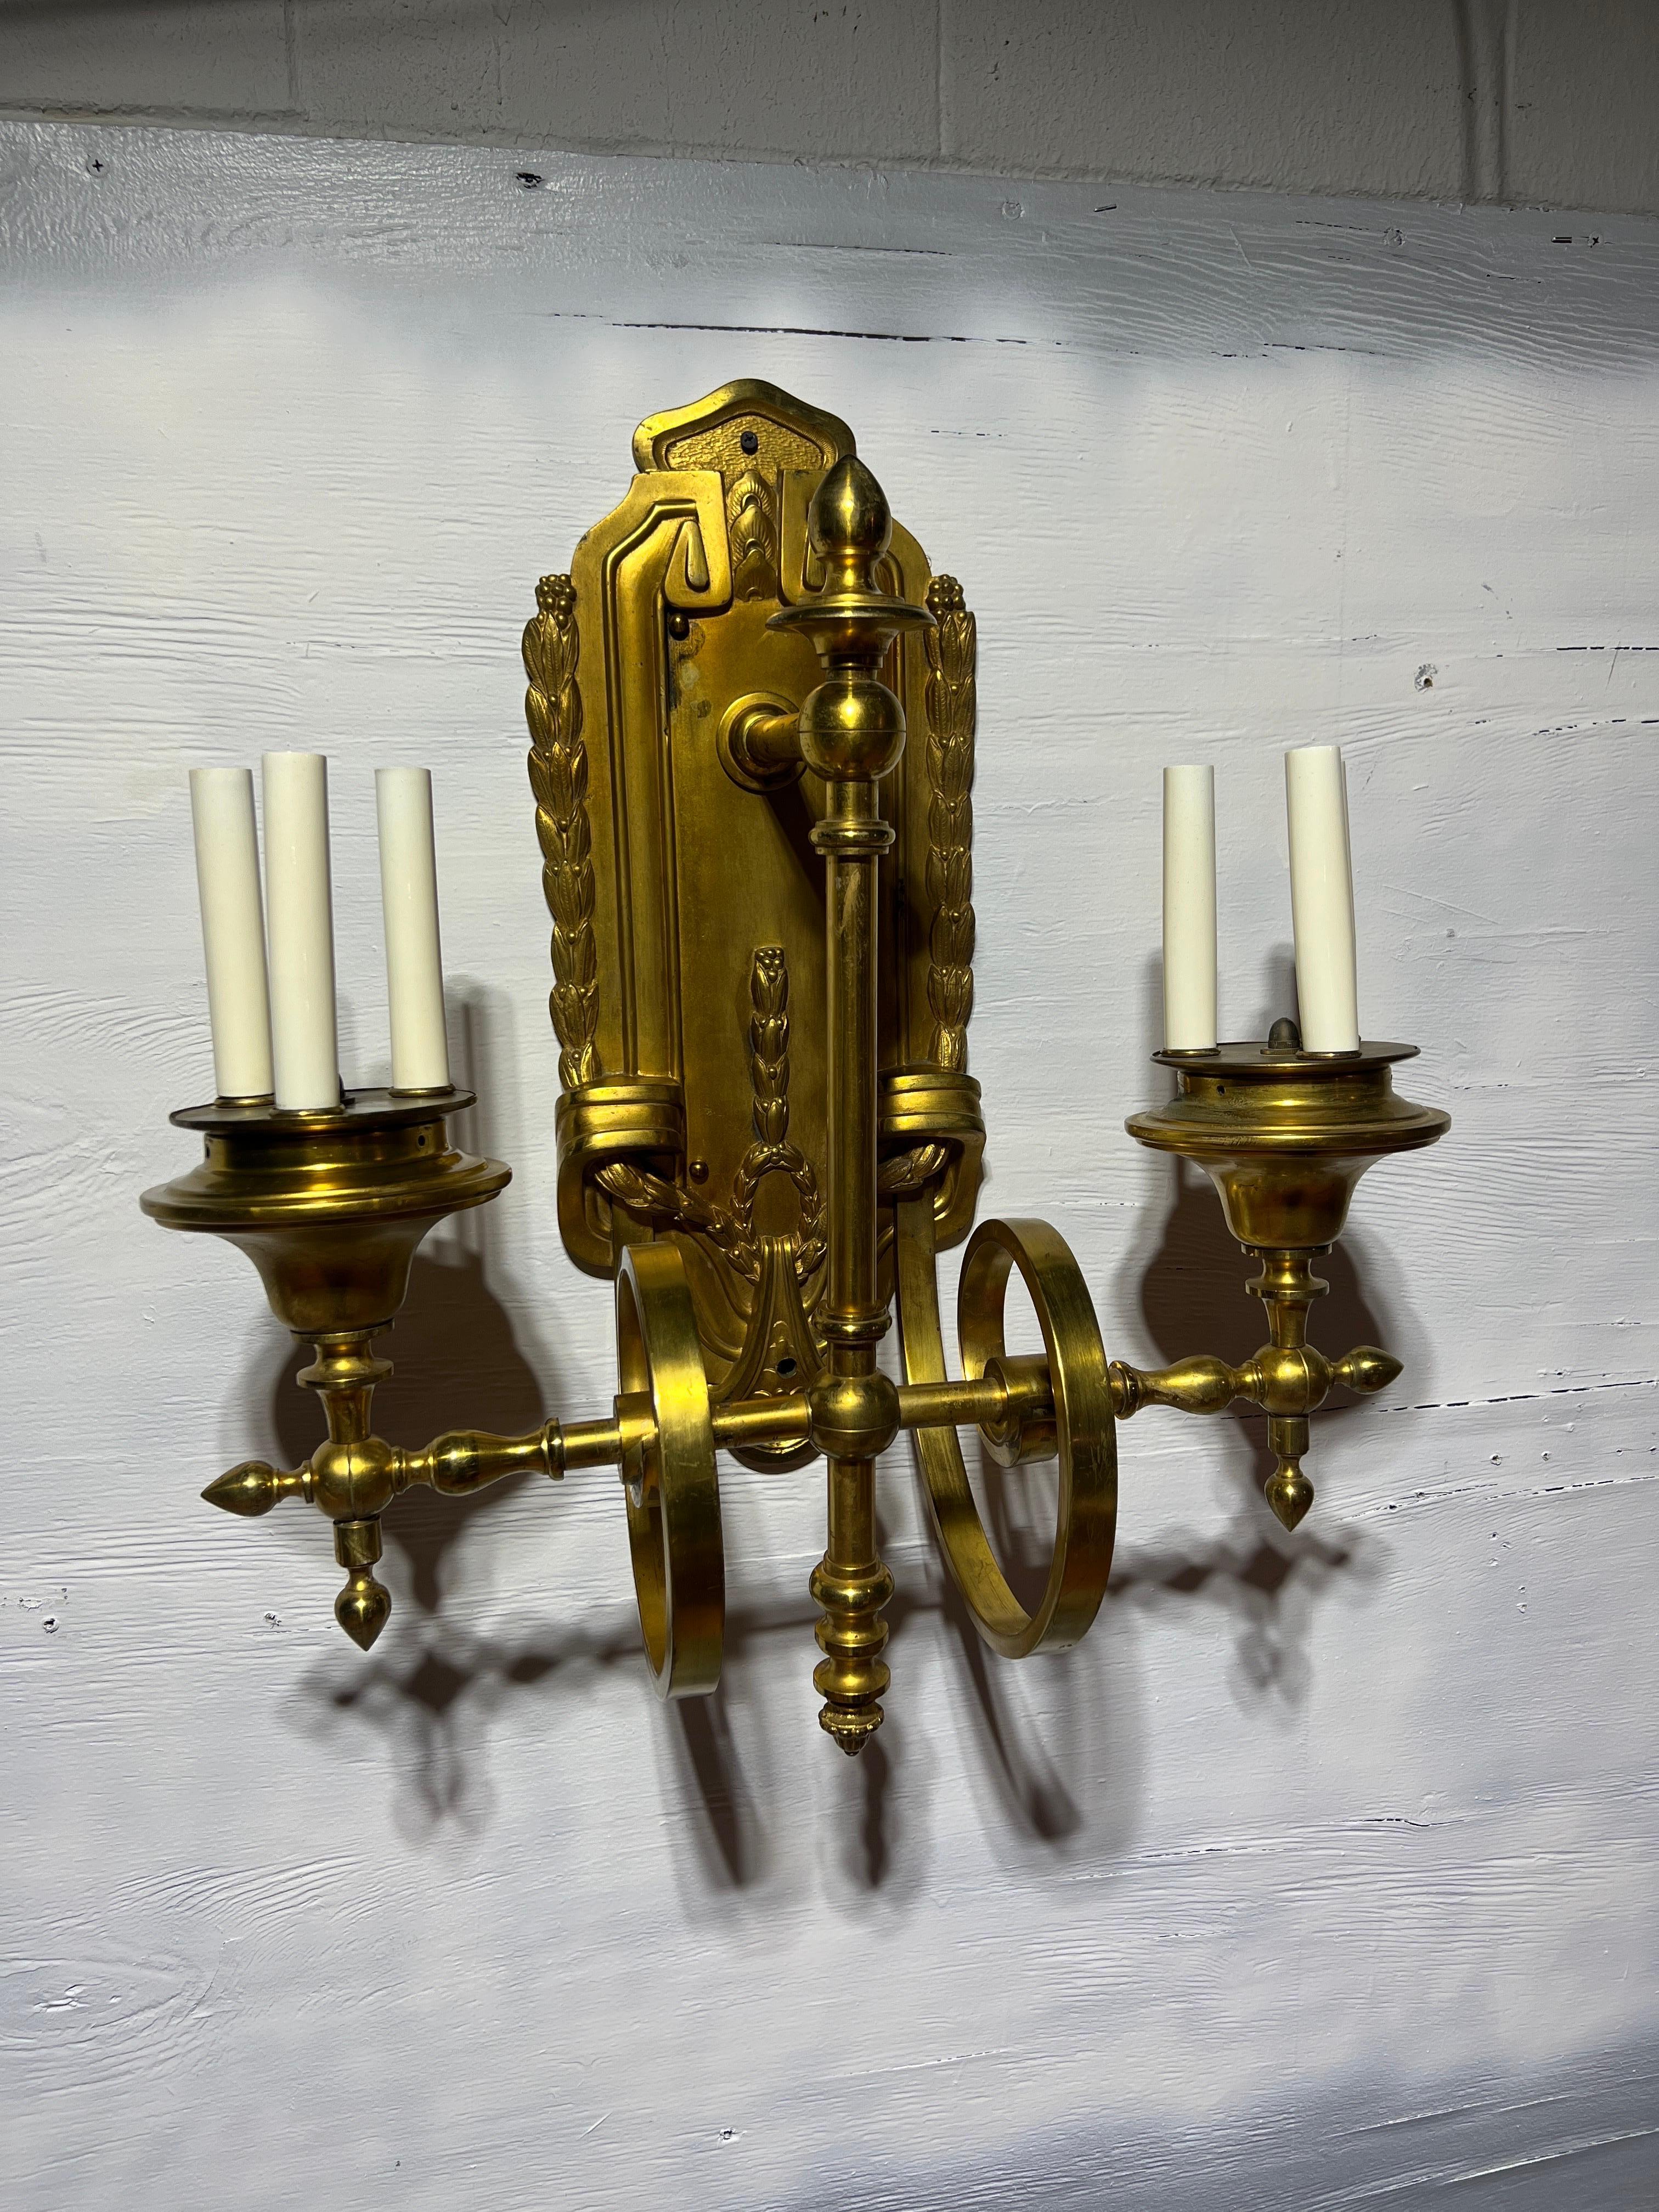 Magnificent E. F. Caldwell & Co Gilt Bronze Two Arm 6-Light Wall Sconce.

E. F. Caldwell & Co. was a prominent American lighting and metalwork company that operated during the late 19th and early 20th centuries. Known for their exquisite